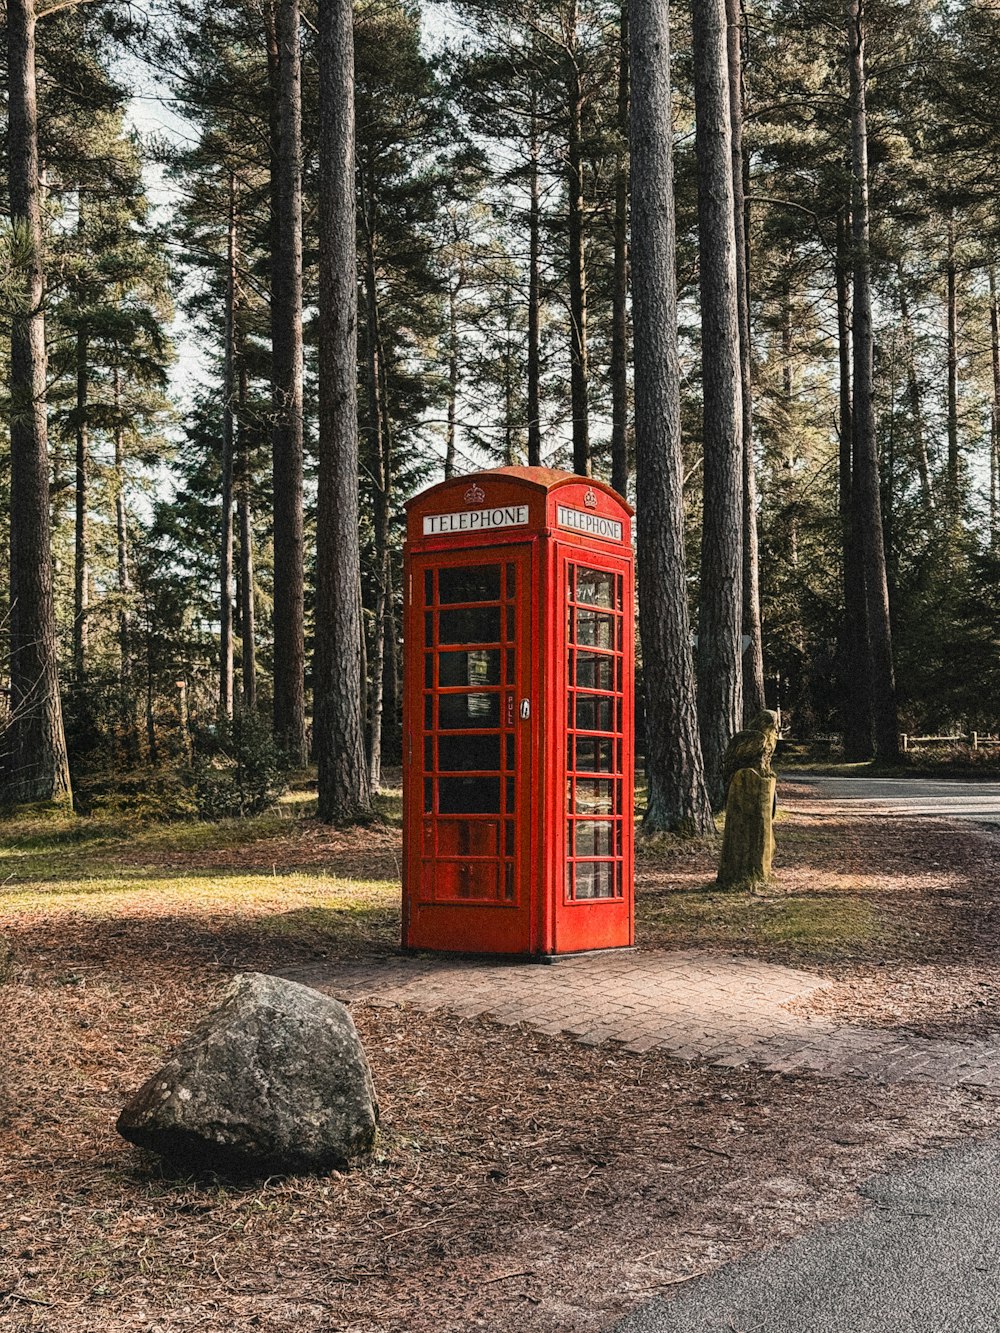 a red phone booth sitting in the middle of a forest